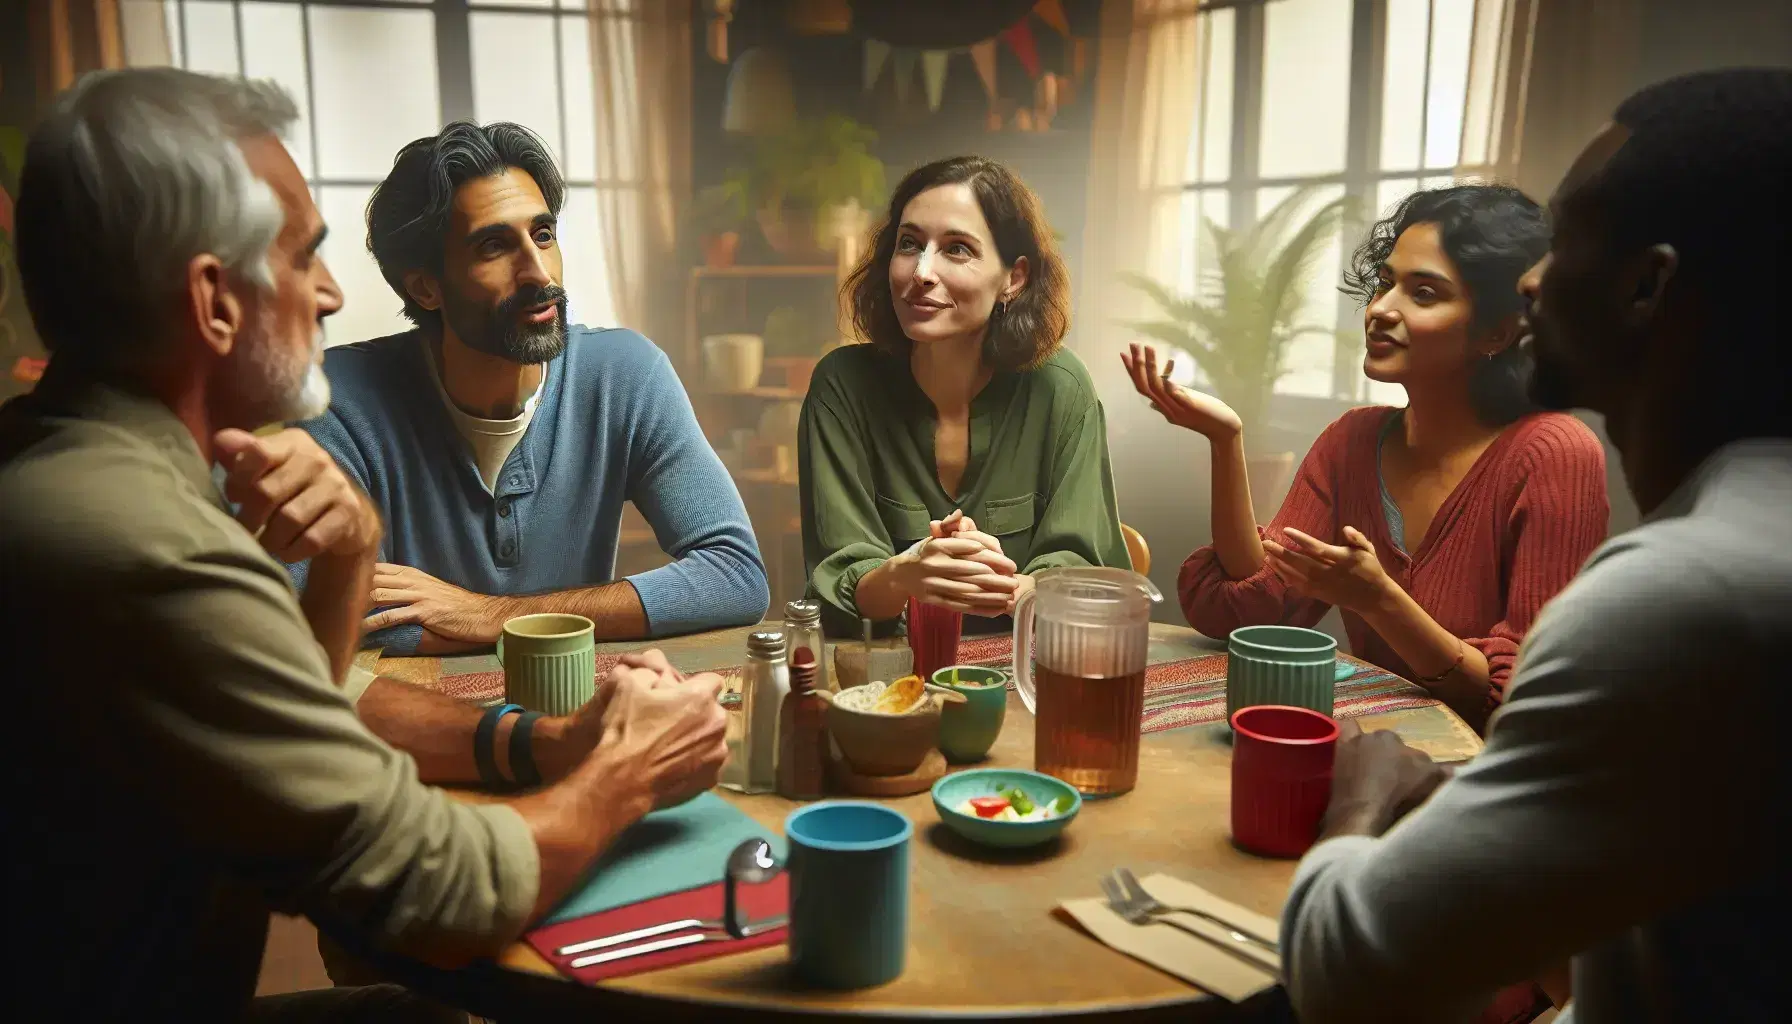 Four diverse individuals engaged in animated discussion at a cafe table with colorful mugs and plates, reflecting a multicultural exchange in a casual setting.